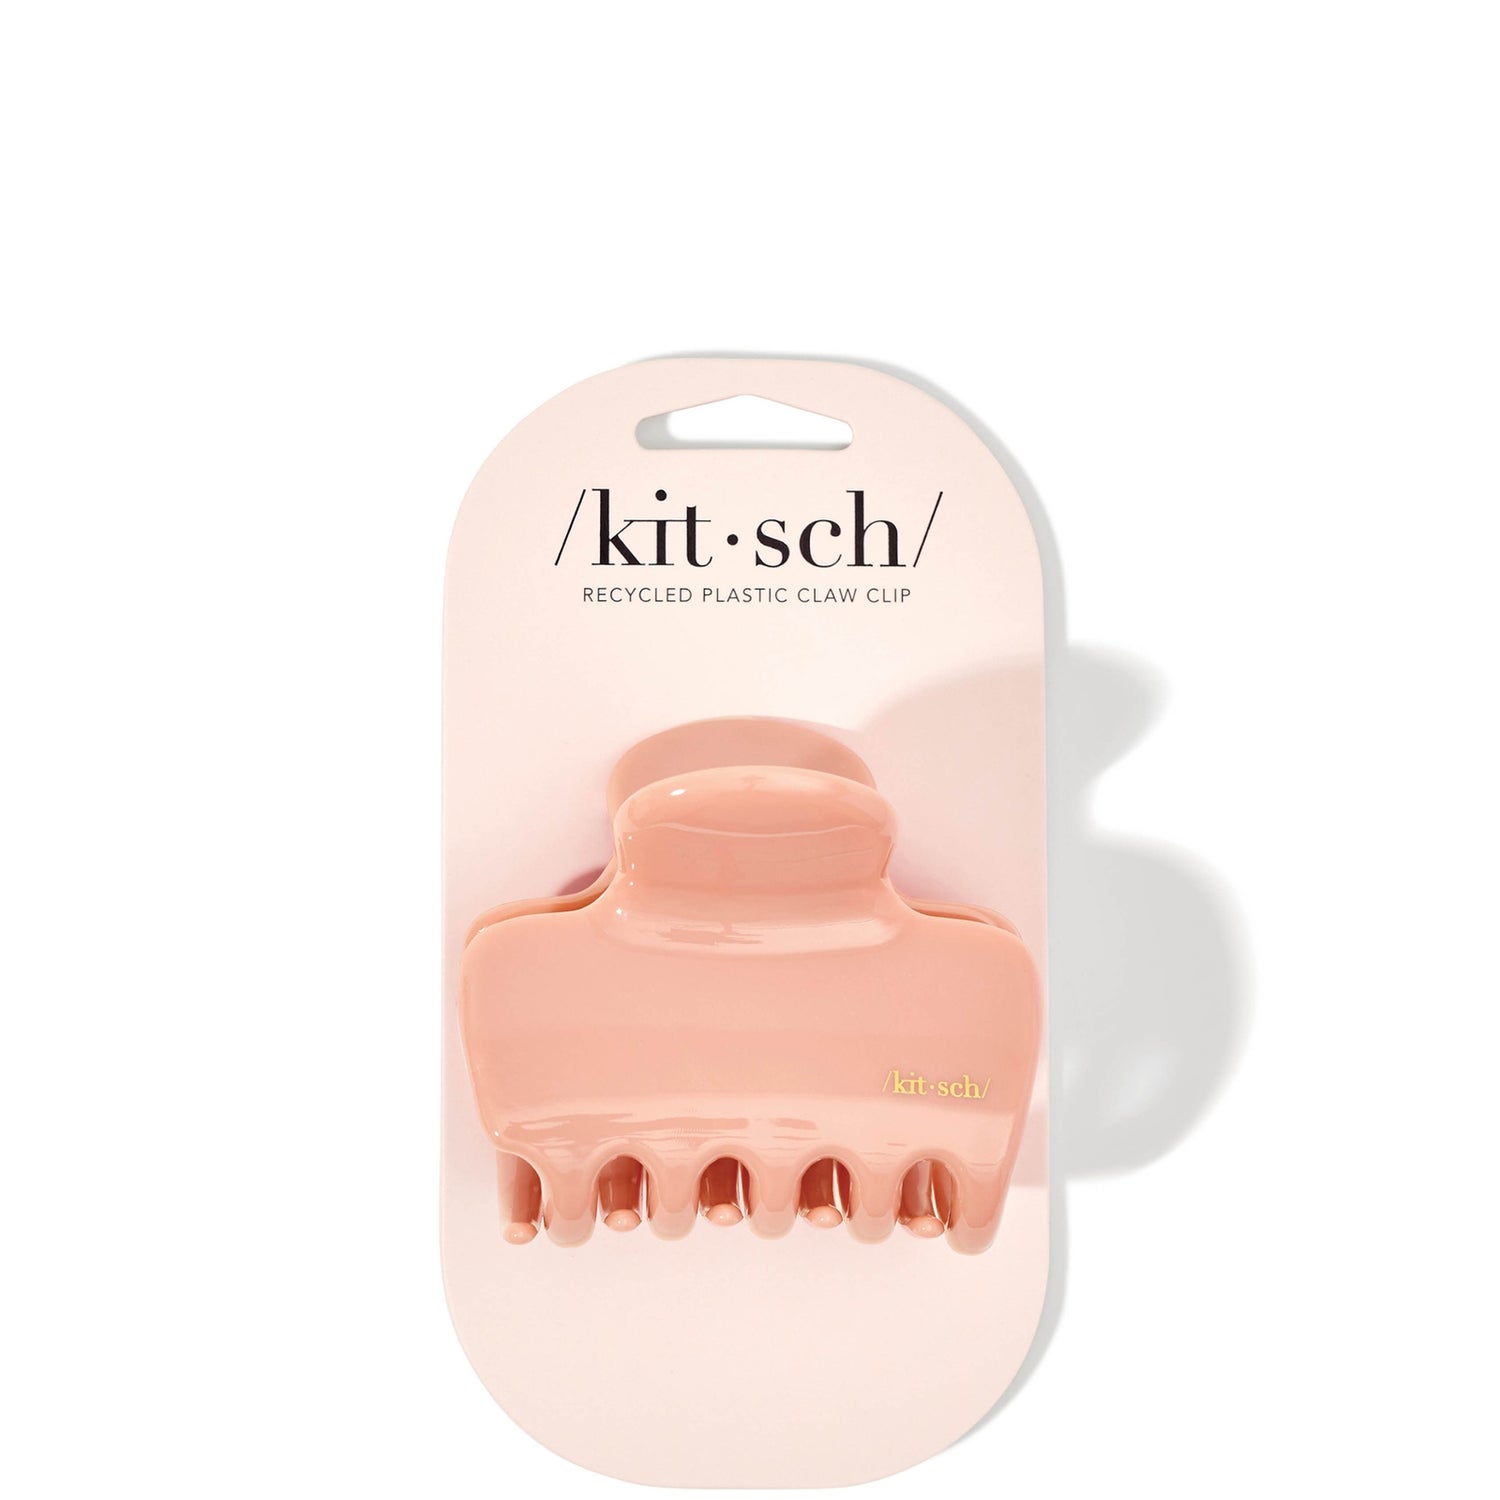 Kitsch Recycled Plastic Puffy Claw Clip - Rosewood 20g